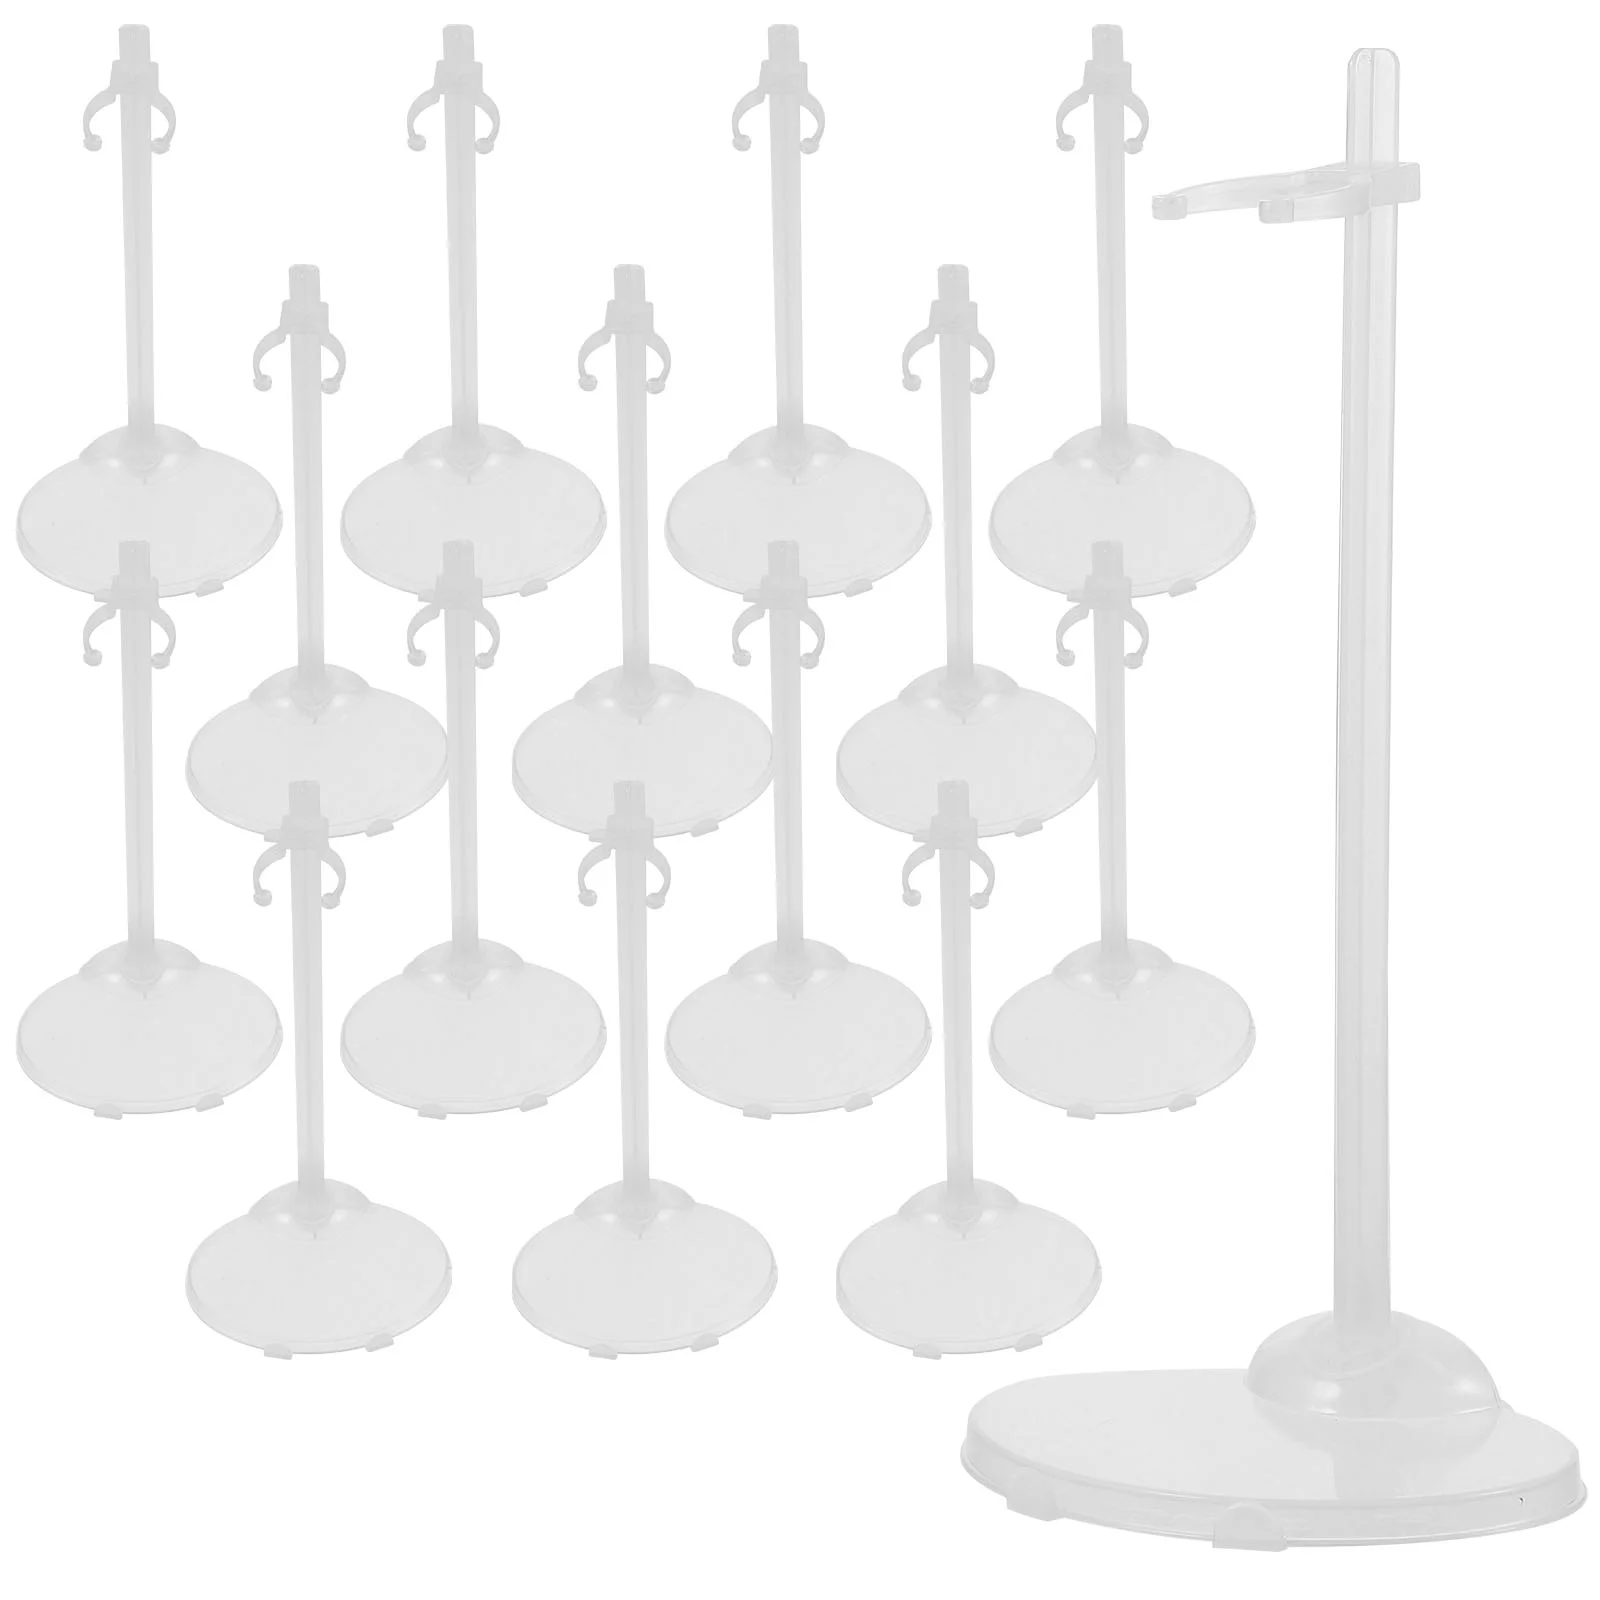 20pcs fail fix dolls for girls clear stands stand holder display support leg holder accessories Transparent Baby Dolls Support for Dolls Dolls Supports Stands Accessories Toy Display Stand Support